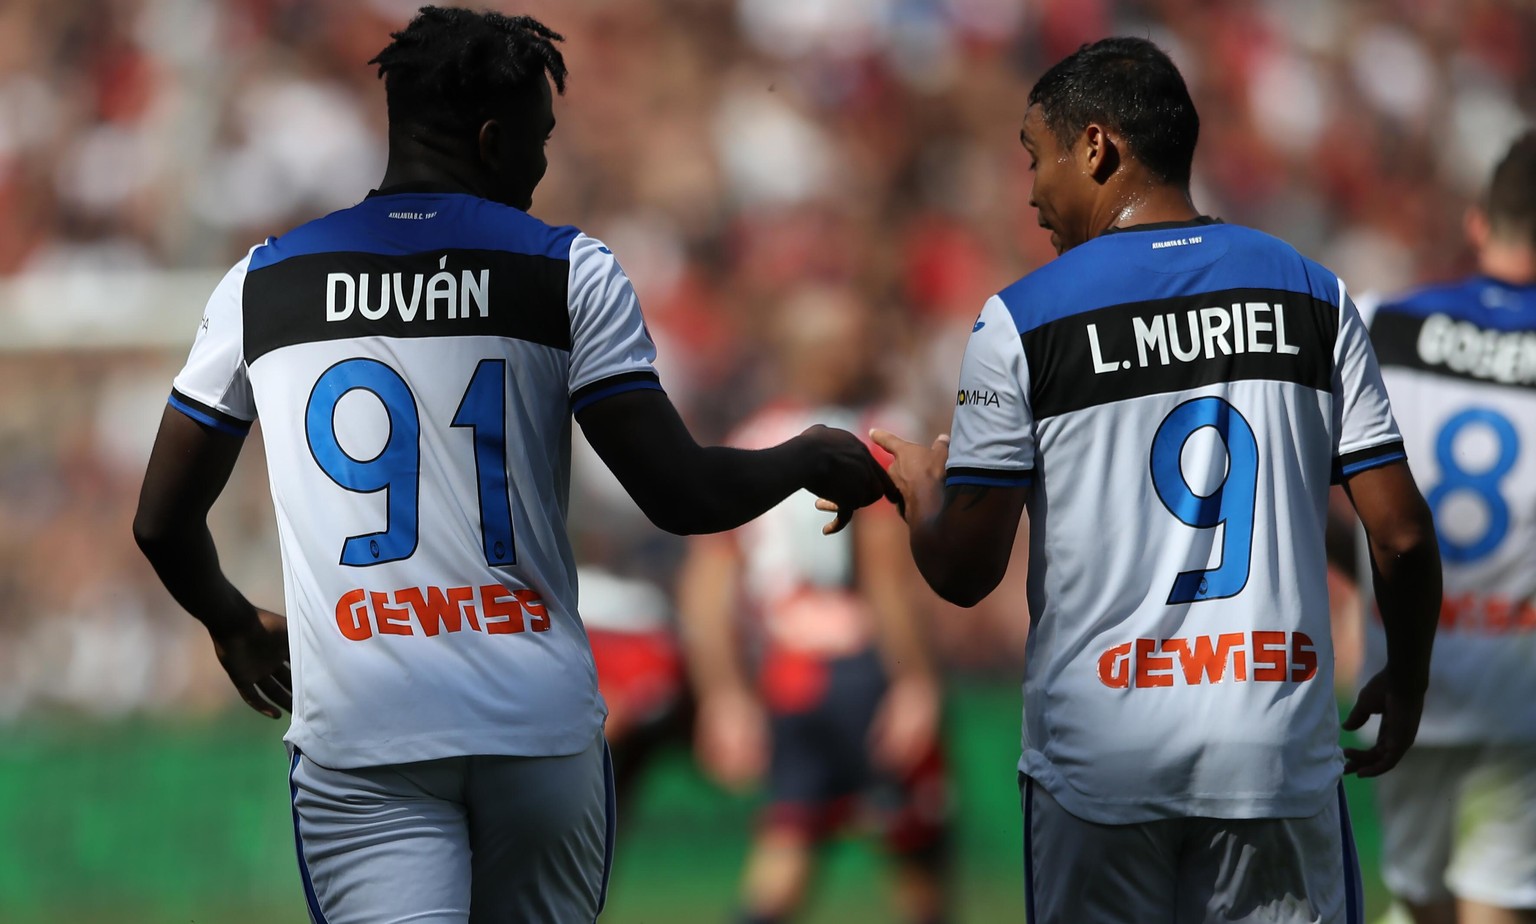 Duvan Zapata of Atalanta celebrates with team mate Luis Muriel after scoring to give the side a 2-1 lead in the 90th minute during the Serie A match at Stadio Luigi Ferraris, Genoa. Picture date: 15th ...